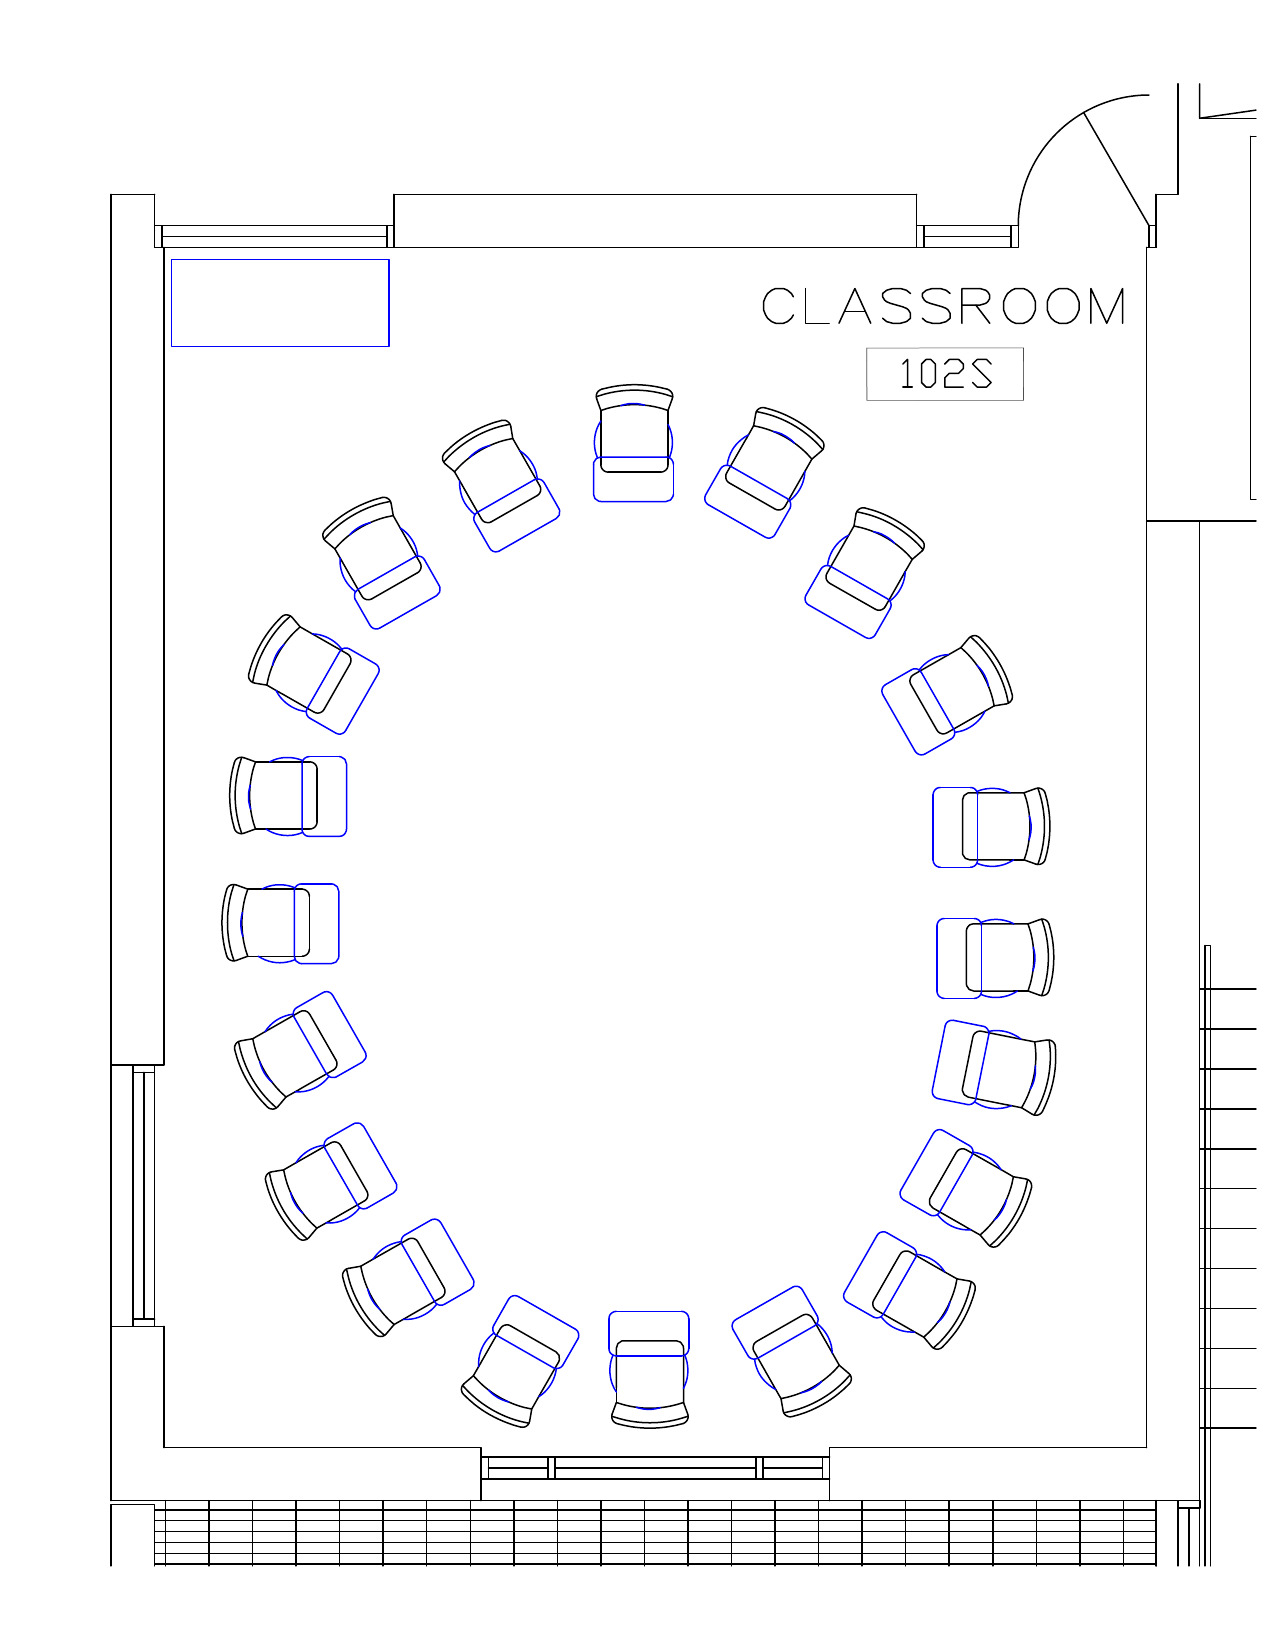 Seating chart for Roberts South 102